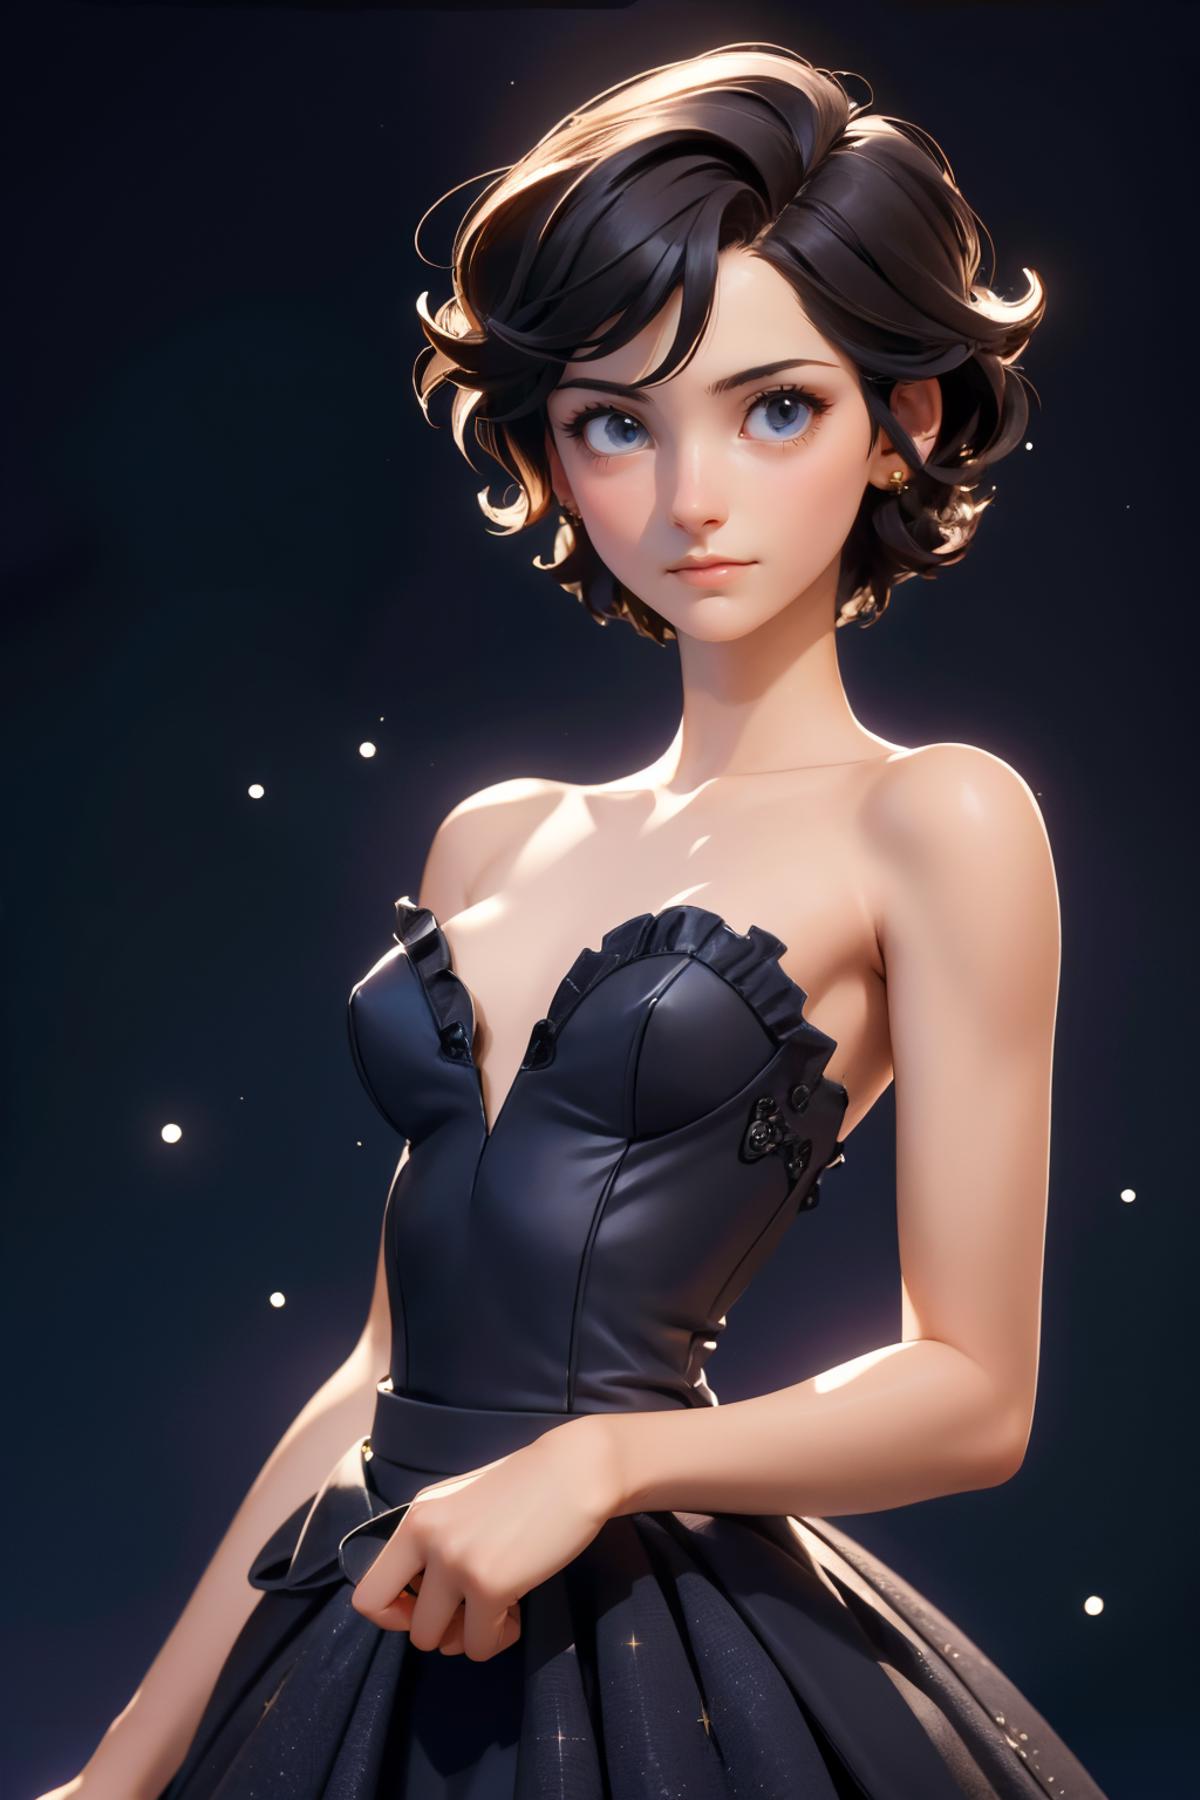 Strapless Glamour - by EDG image by Abraxo